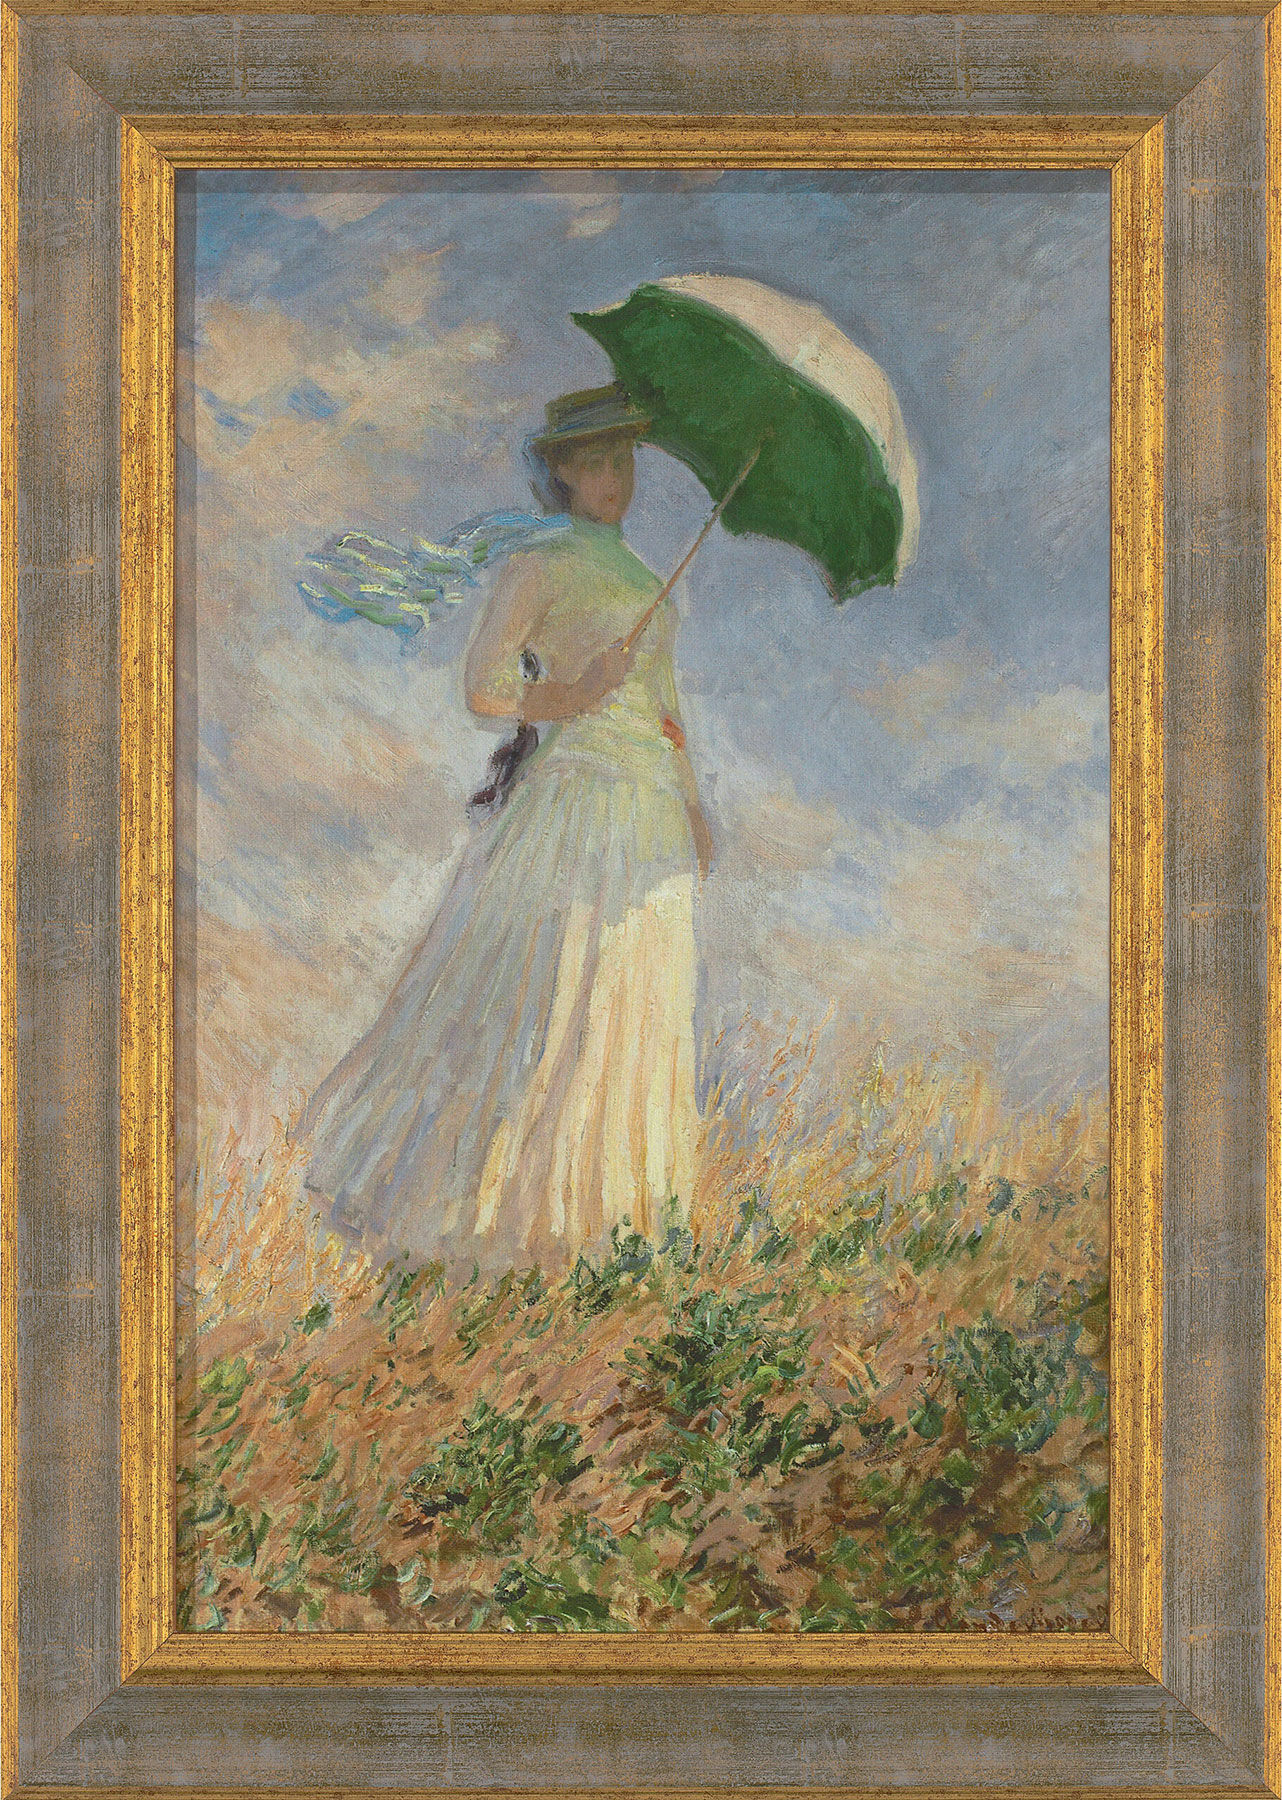 Picture "Woman with Parasol" (1886), framed by Claude Monet